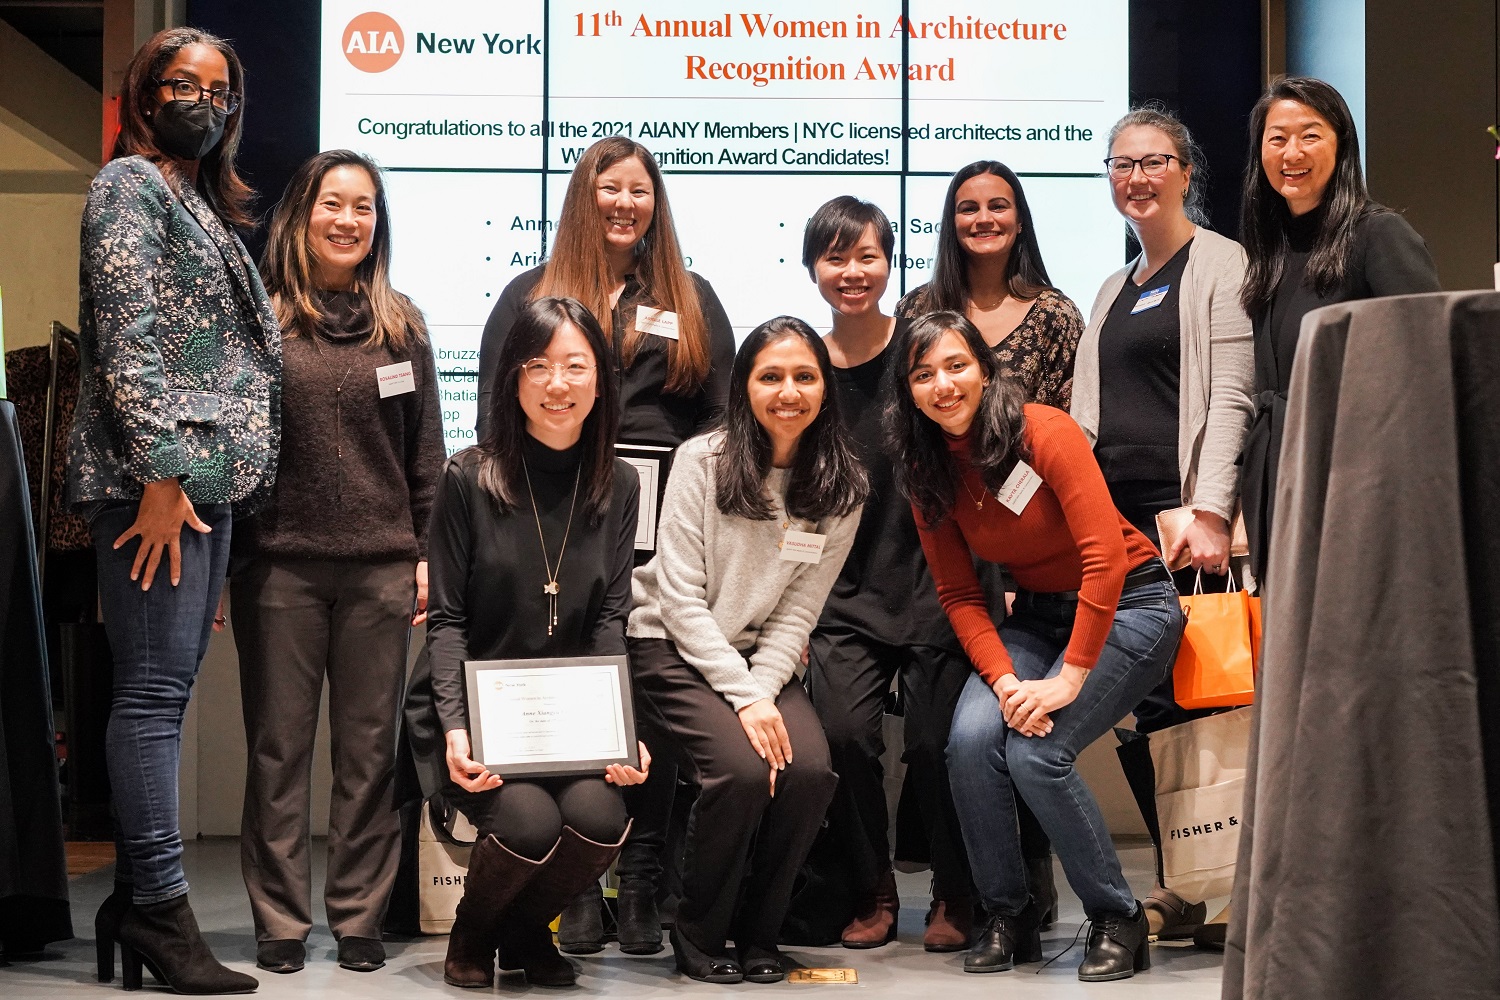 Image at 11th Annual WIA Recognition Award